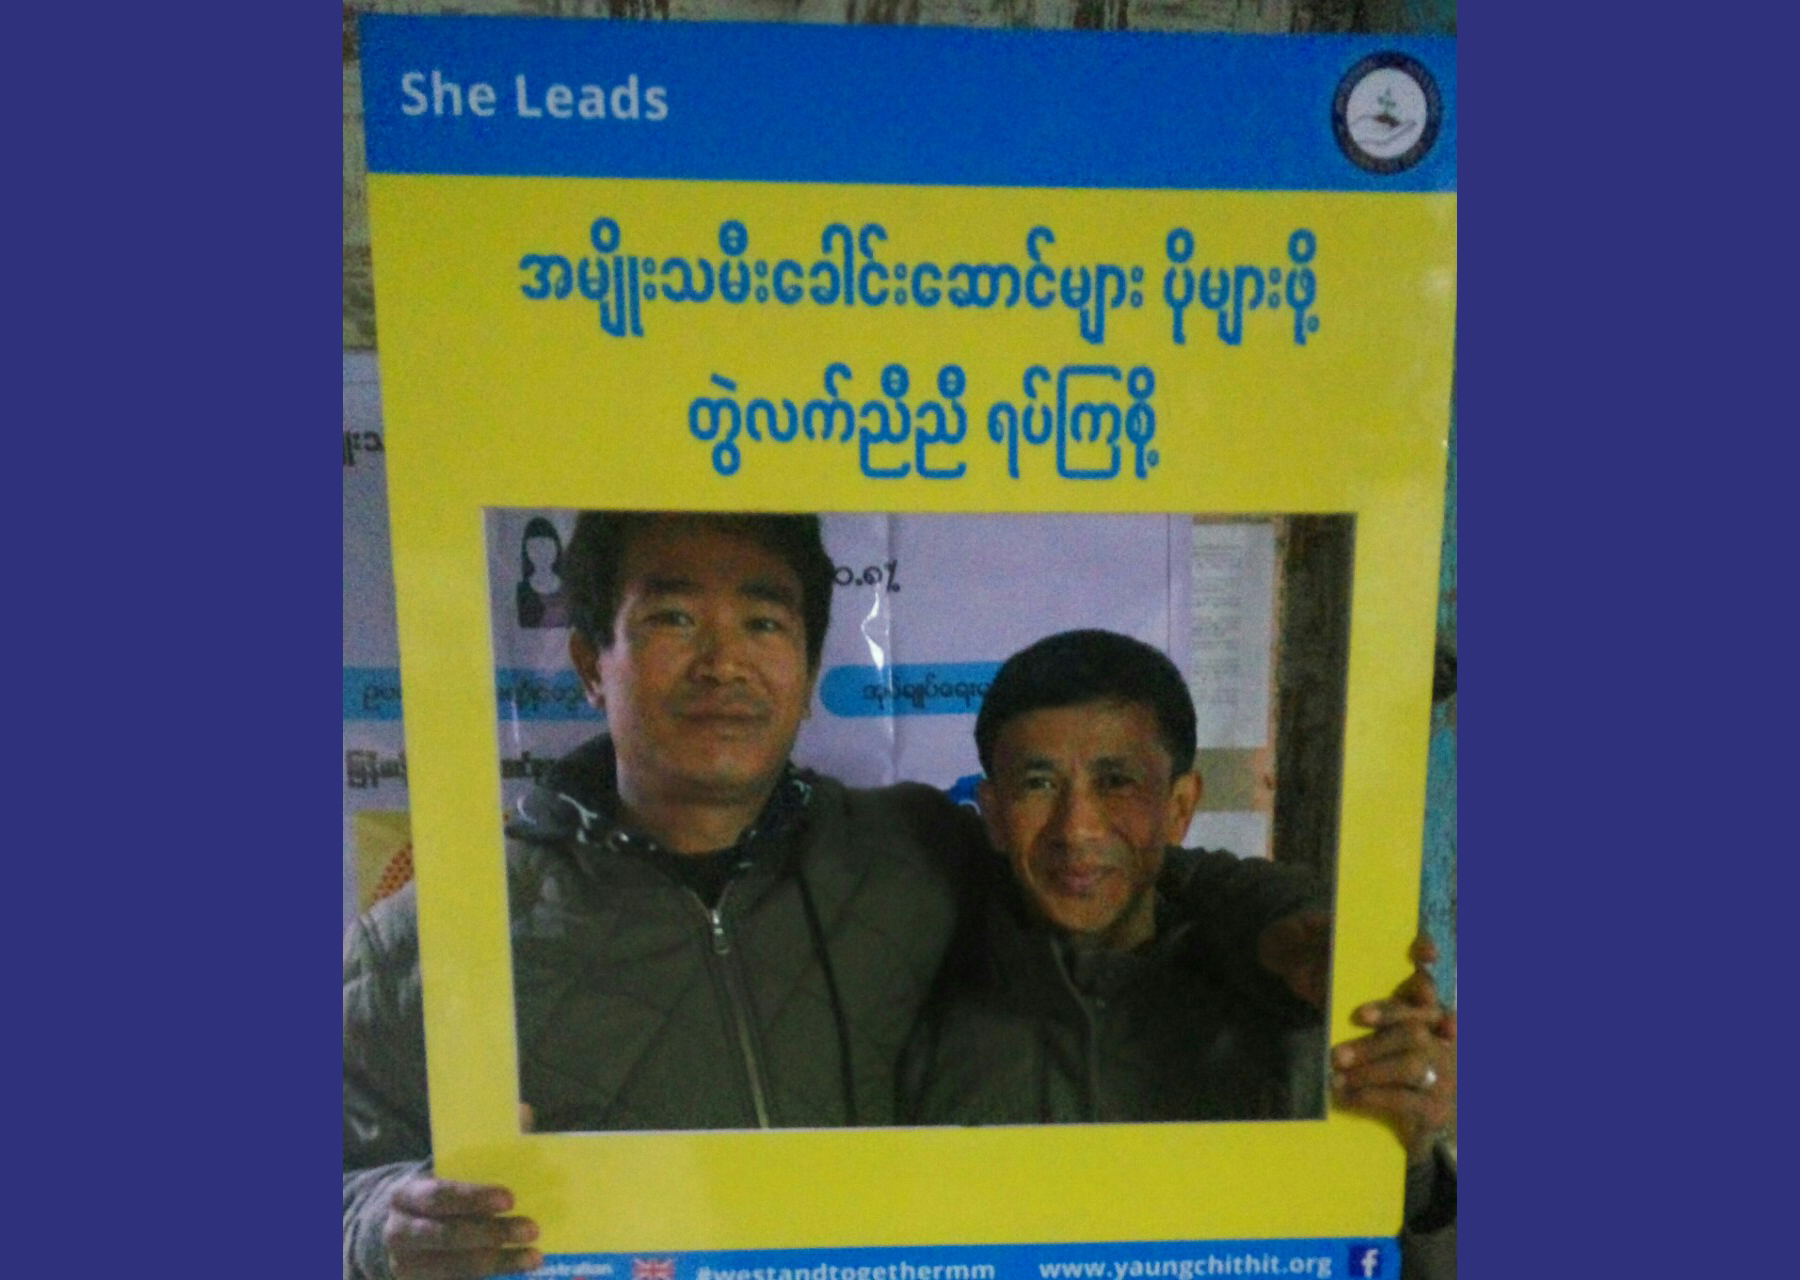 We Stand Together for More Women Leaders (Twe Let Nyi Nyi ) Campaignin Namtu, Northern Shan State